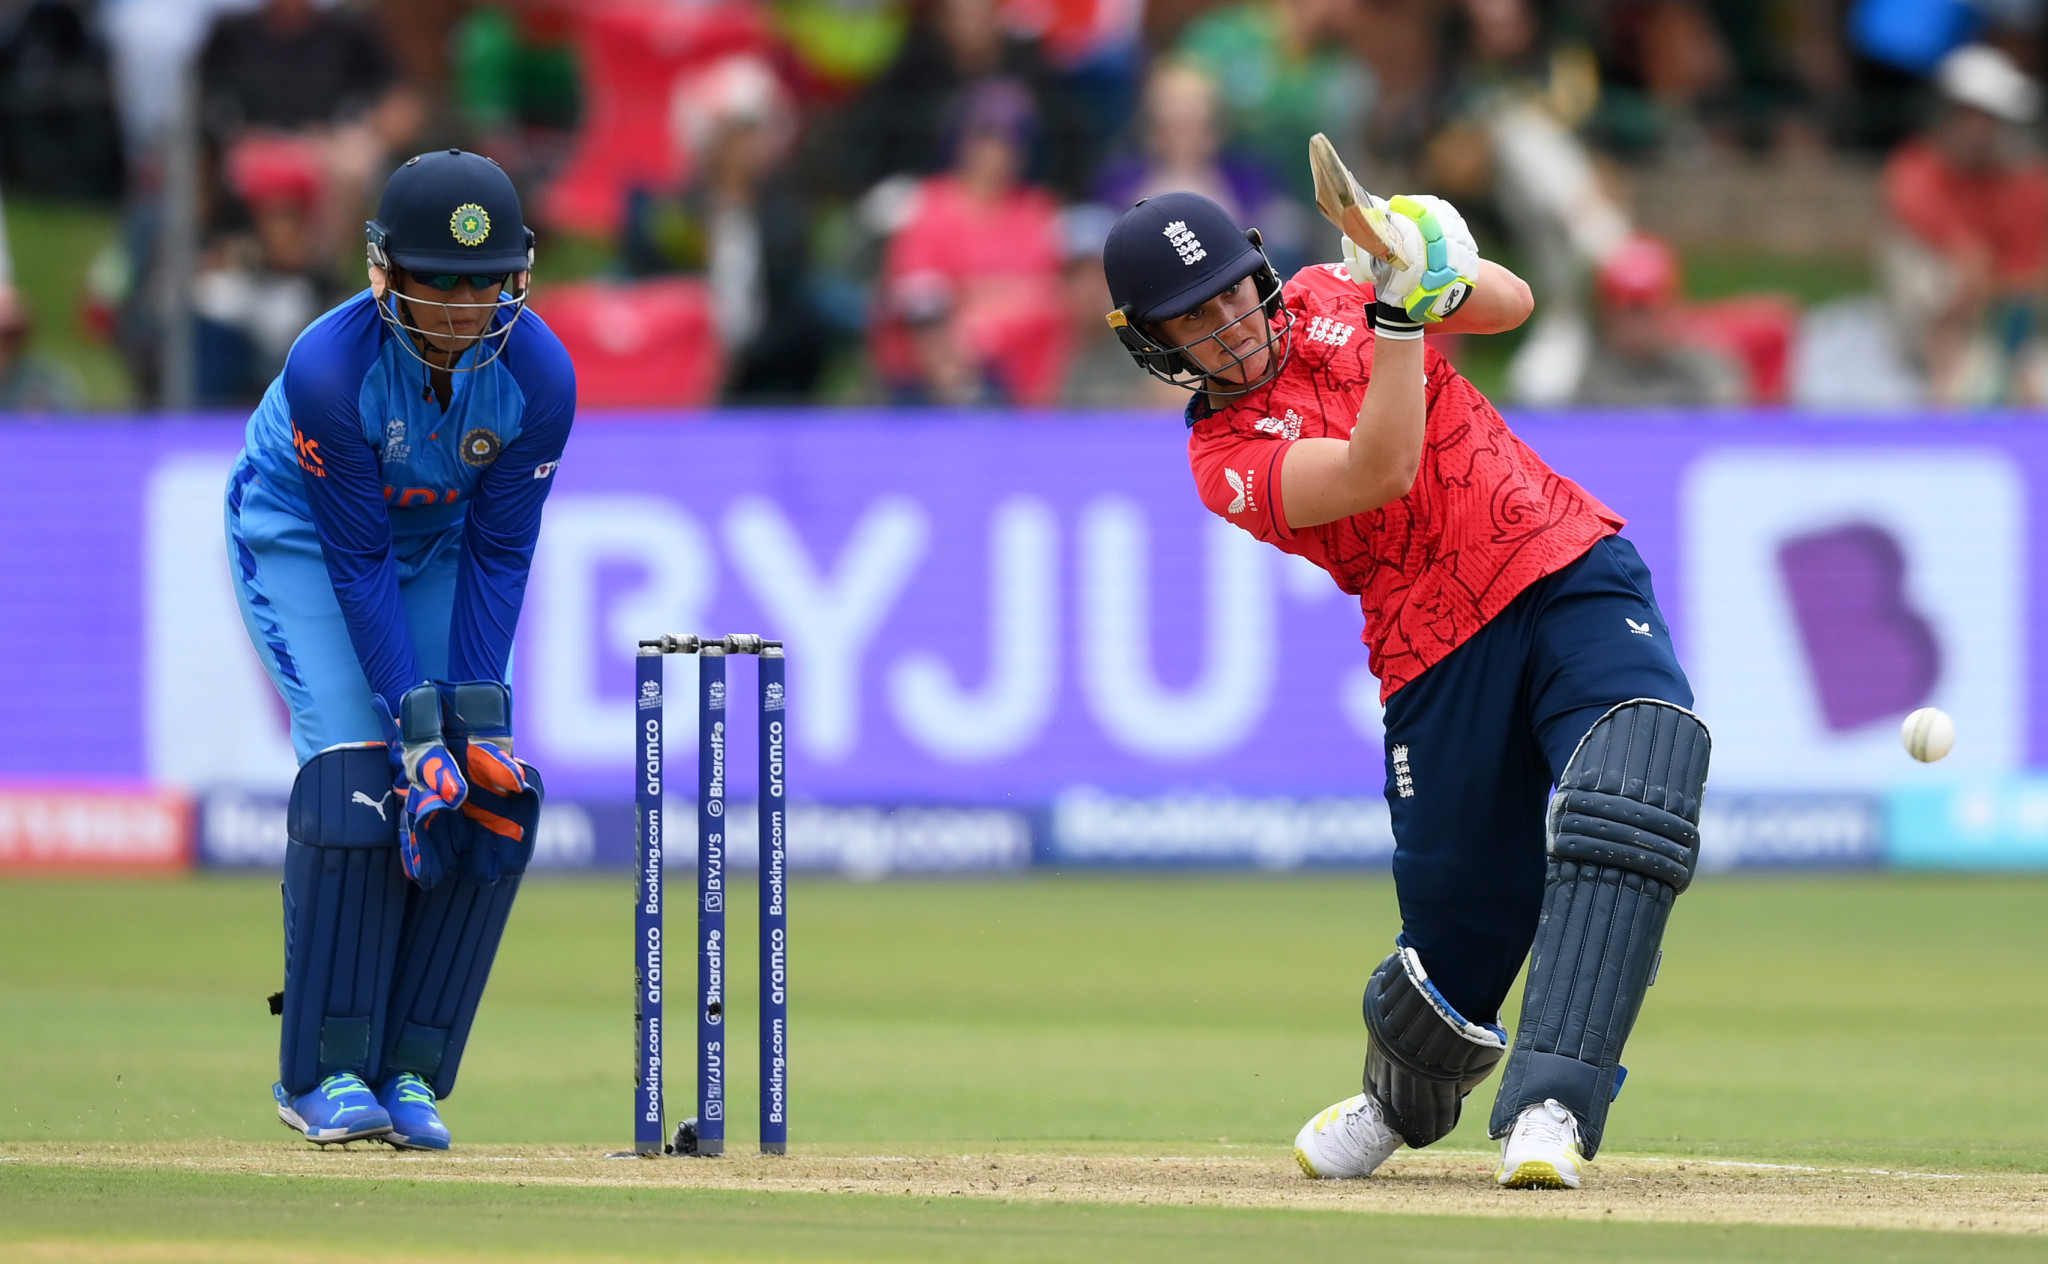 England and Australia remain unbeaten at ICC Women’s T20 World Cup 